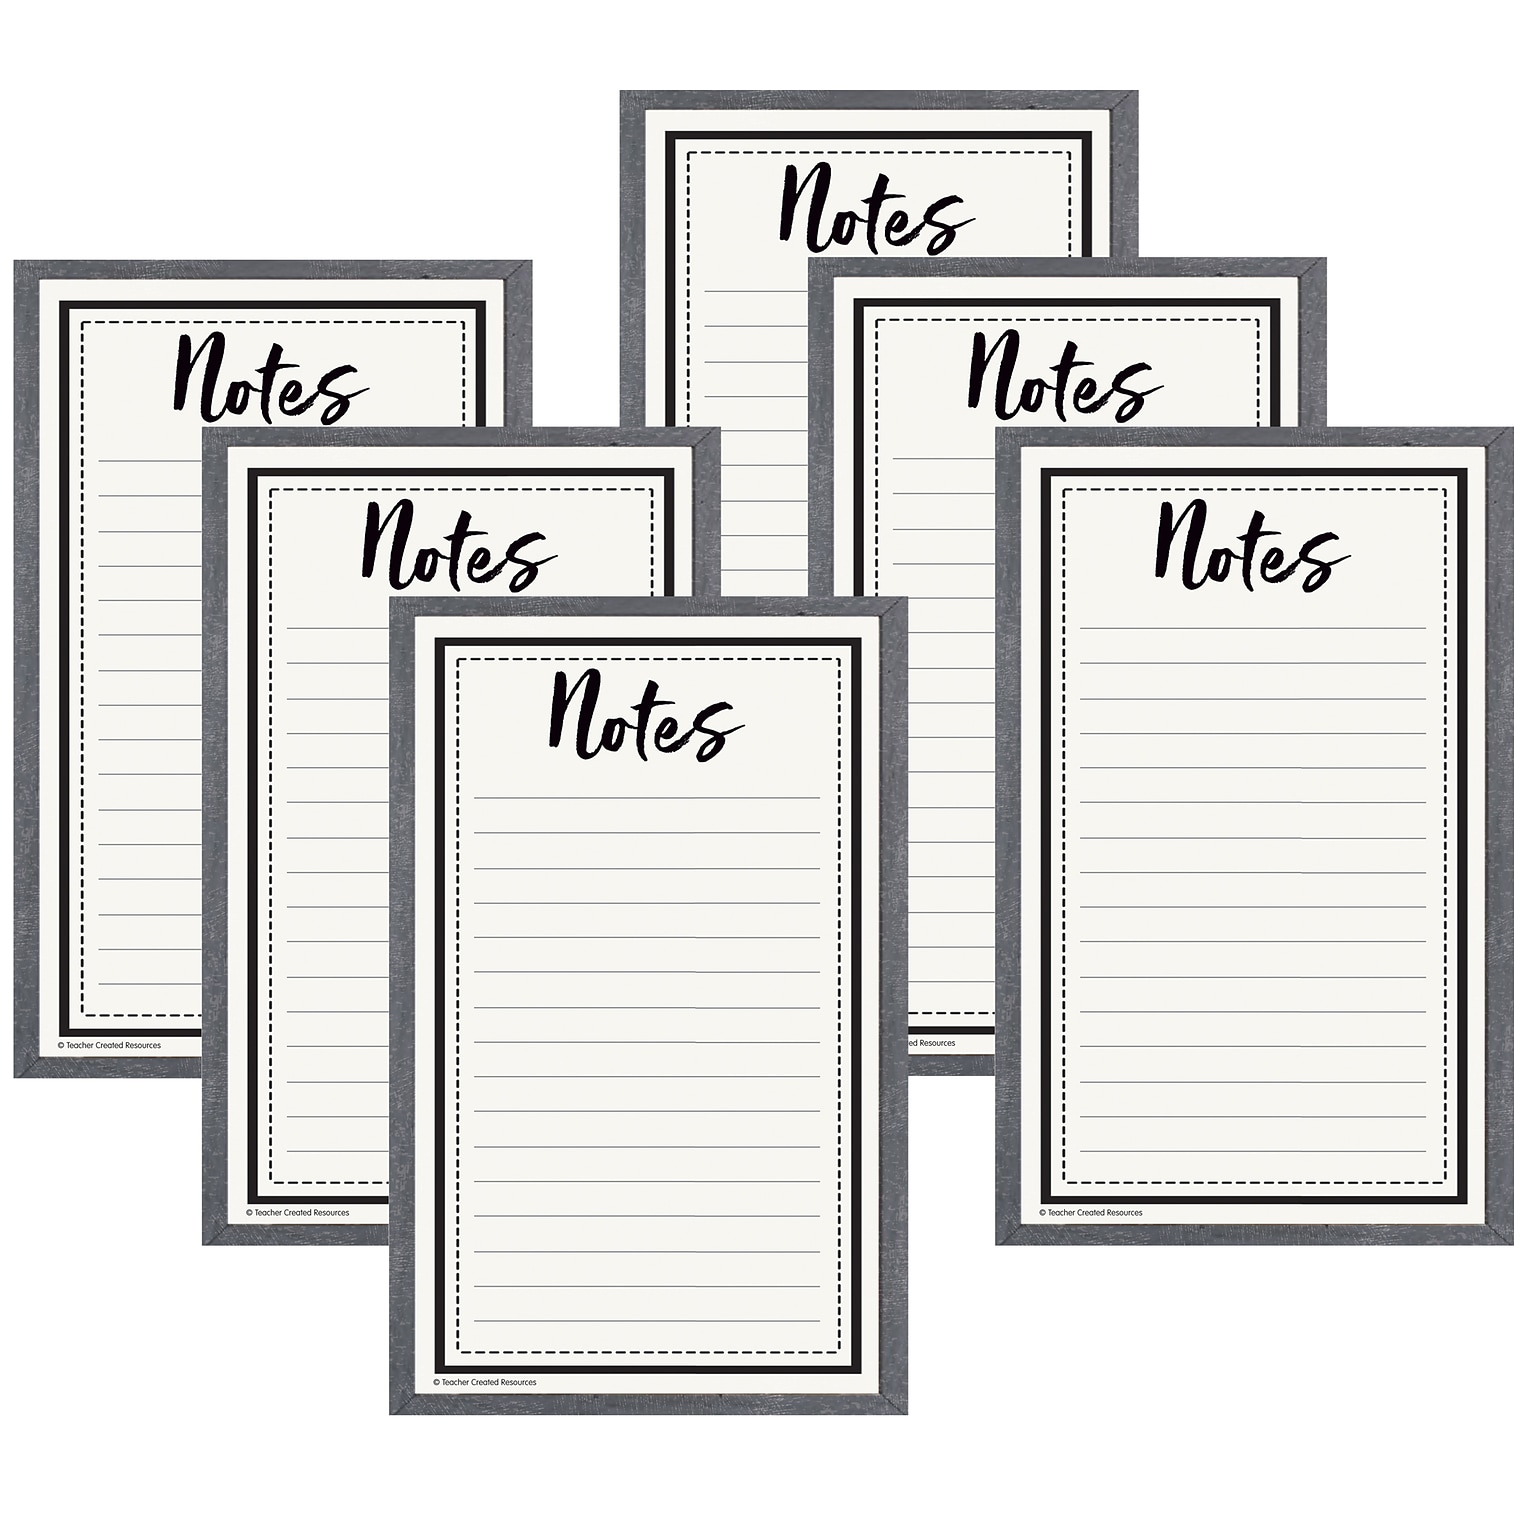 Teacher Created Resources® Note Pad, 5.25 x 8.25, 50 Sheets Per Pad, Modern Farmhouse, Pack of 6 (TCR8529-6)